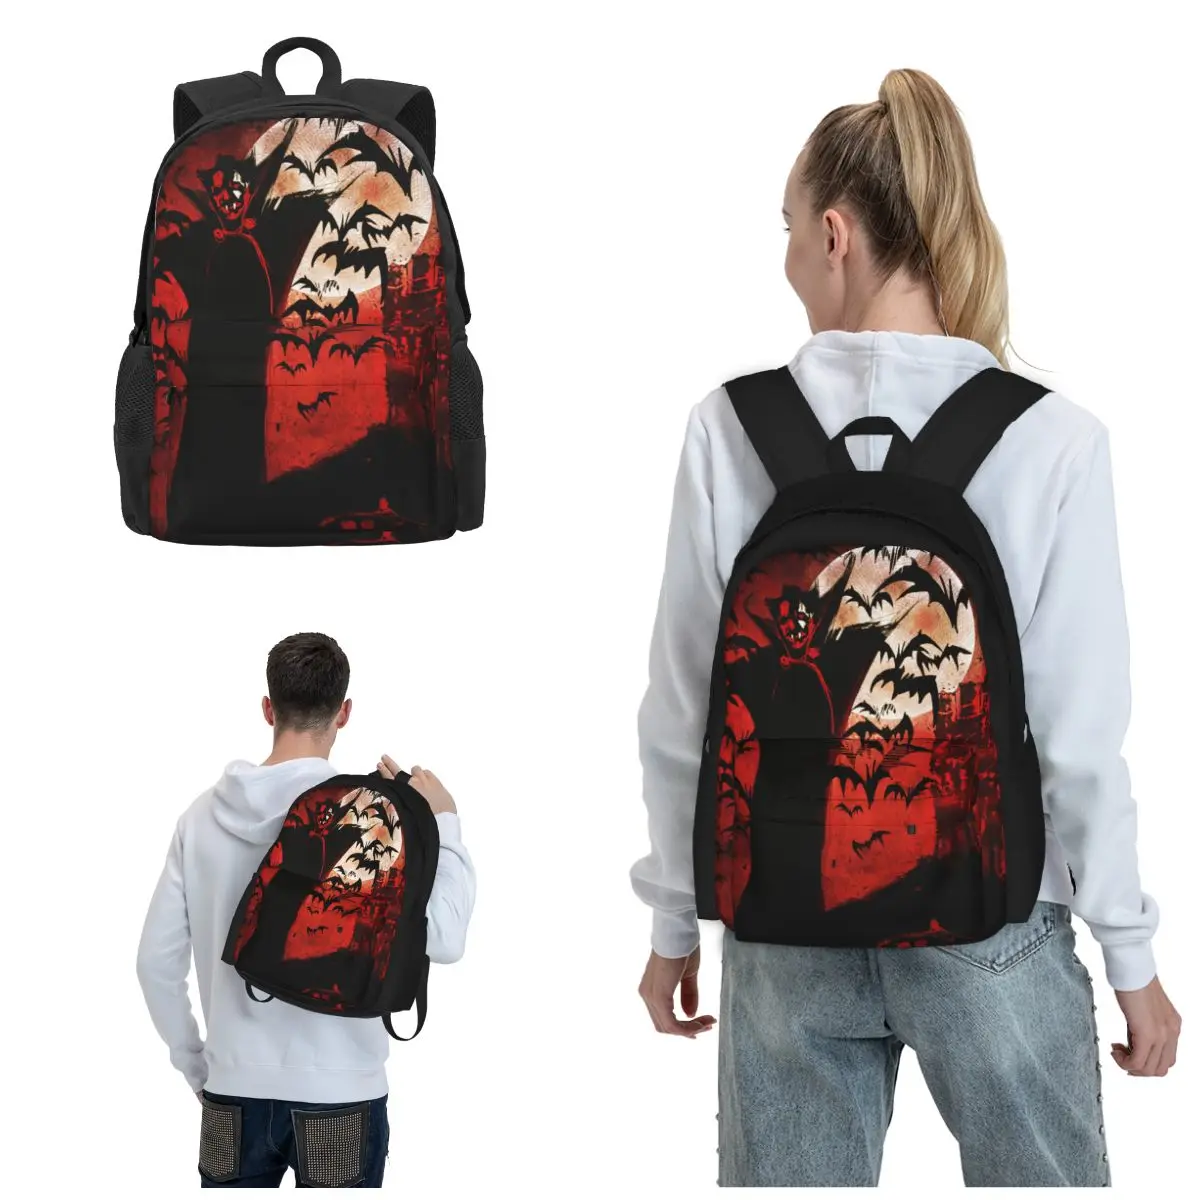 

Halloween Night Bat Bookbag Lightweight Carry Your Essentials With Ease And Elegance In Our Sleek Backpacks High School College